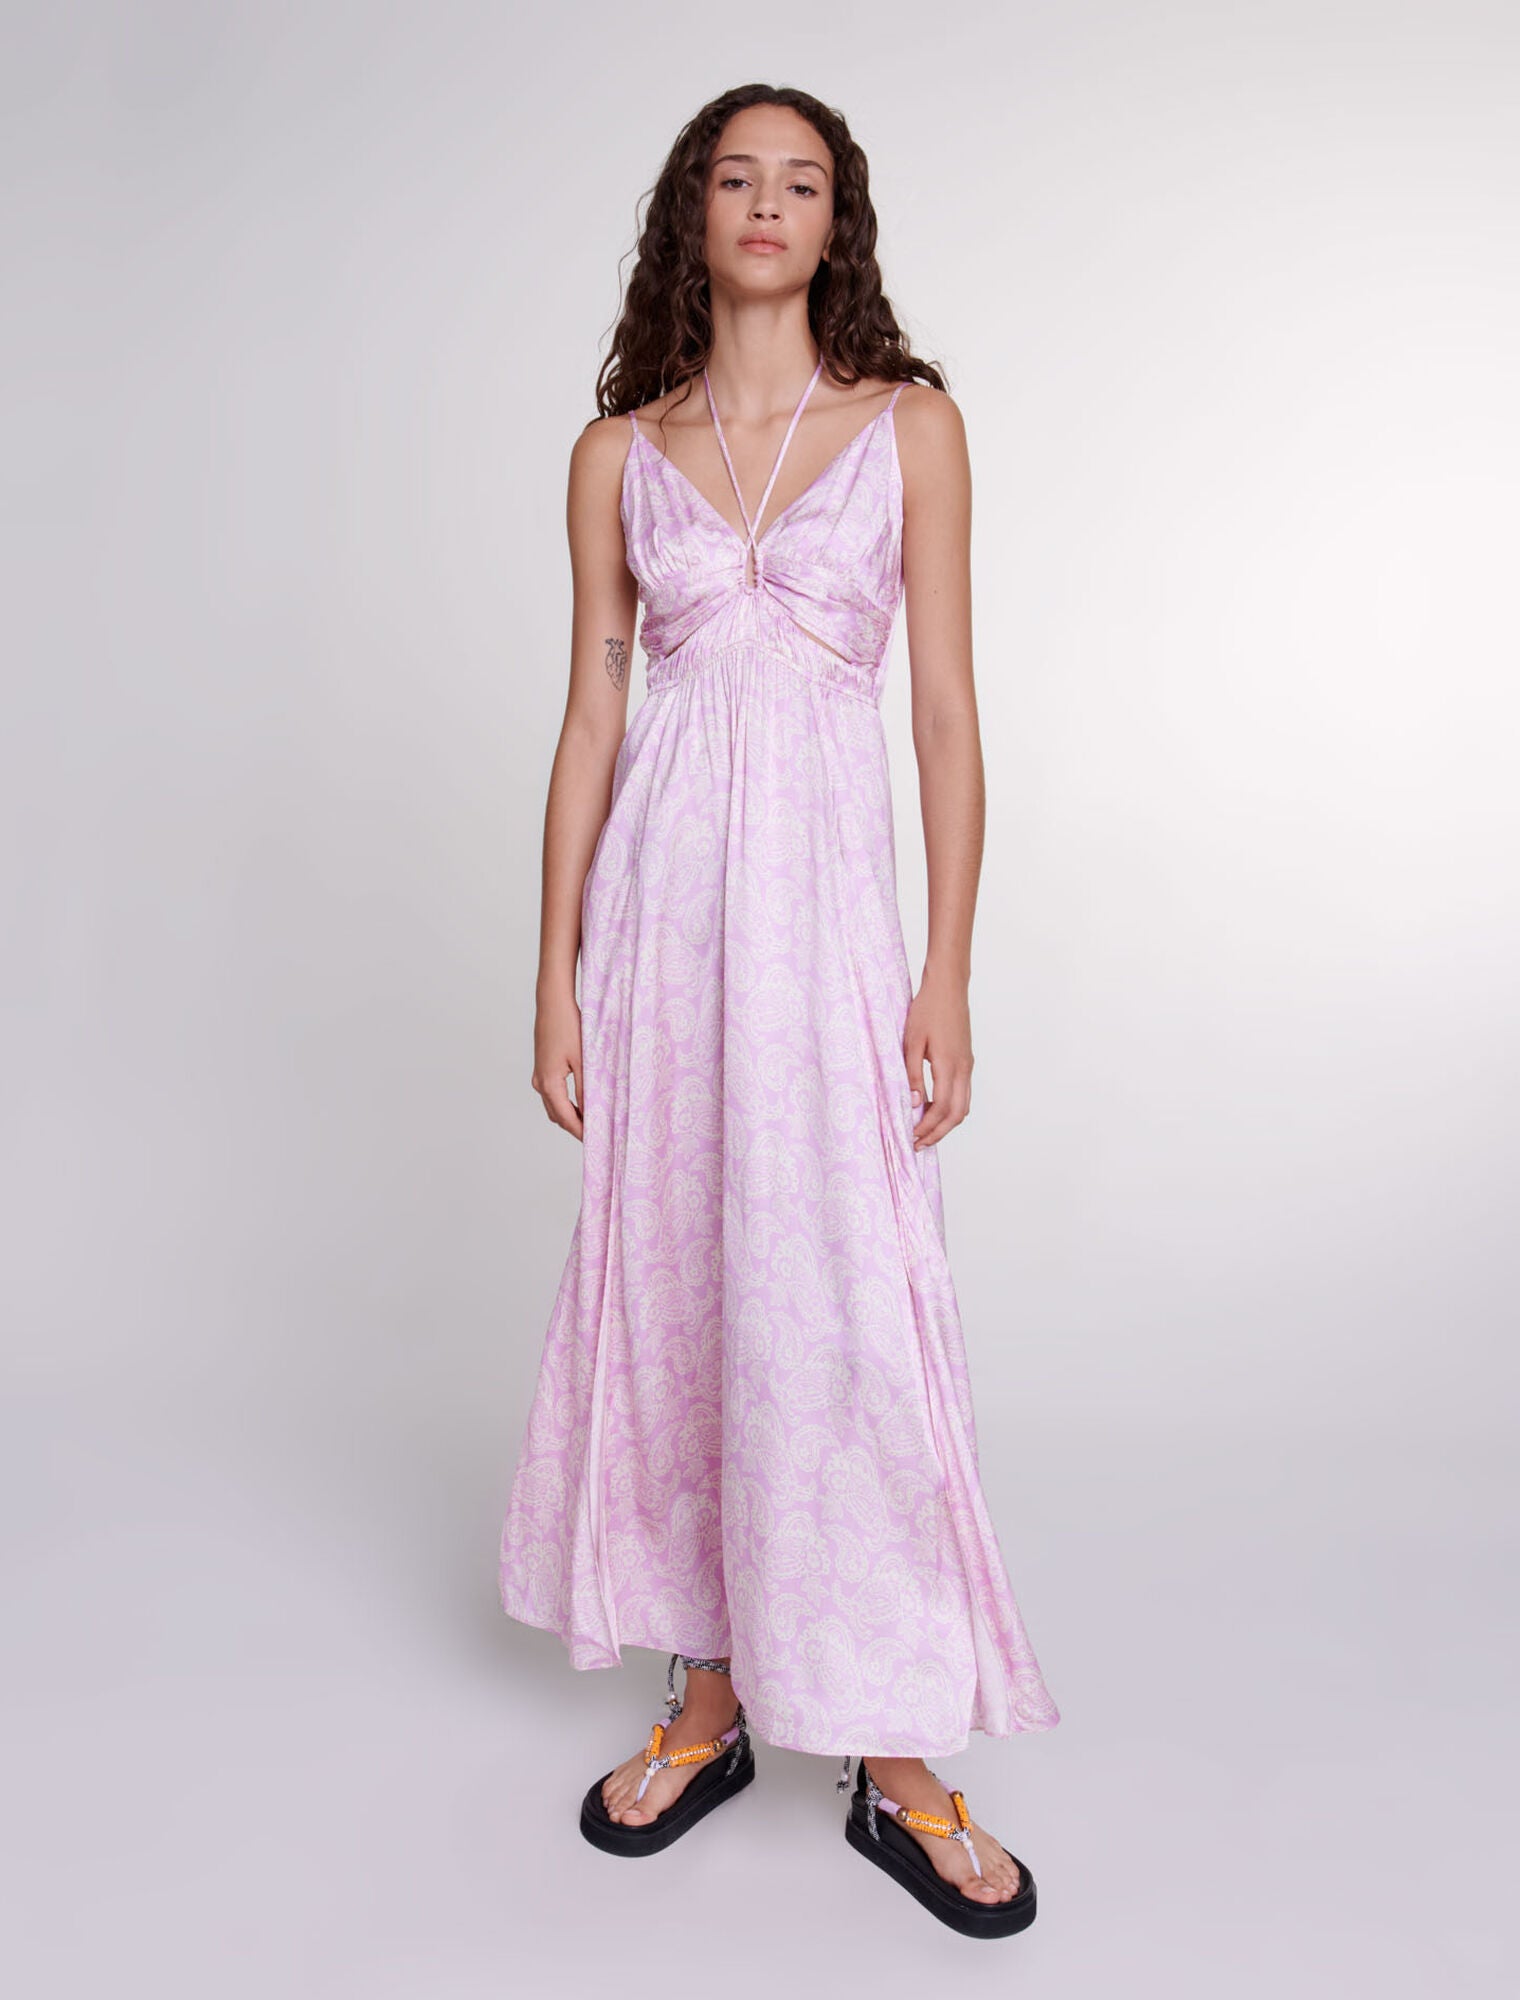 Pink Cashmere Print featured  Openwork patterned maxi dress